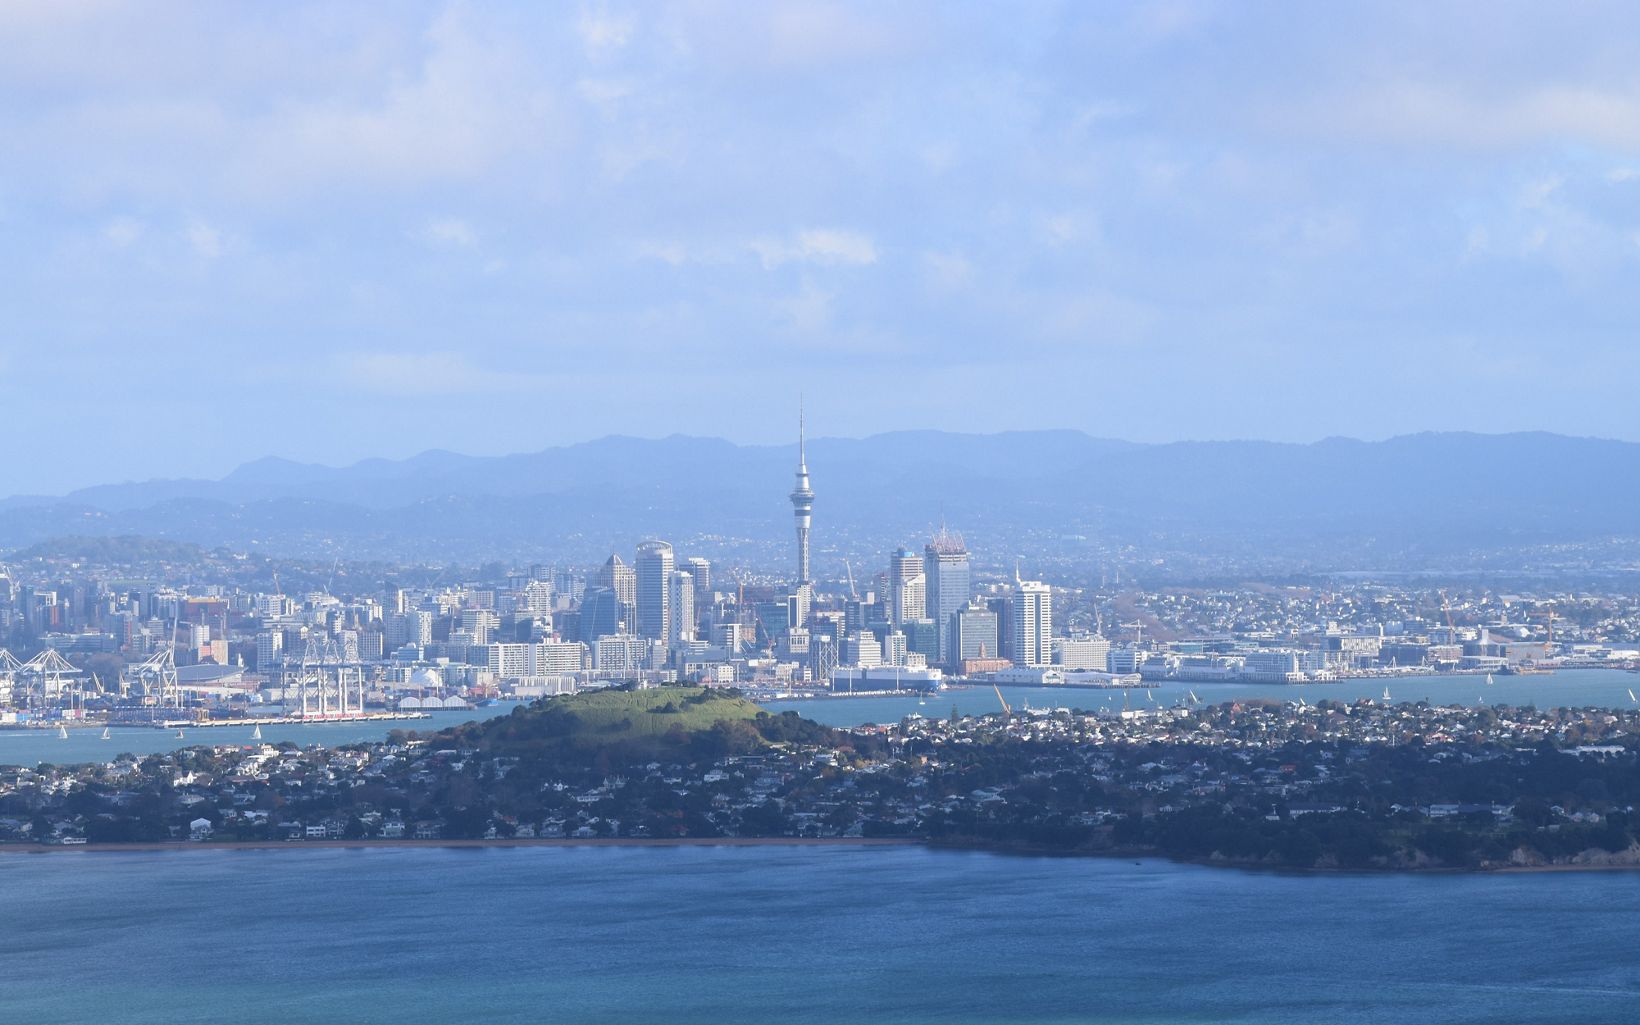 Based in Auckland, the Hauraki Gulf Forum is a statutory body which promotes and facilitates integrated management and the protection and enhancement of the Gulf.